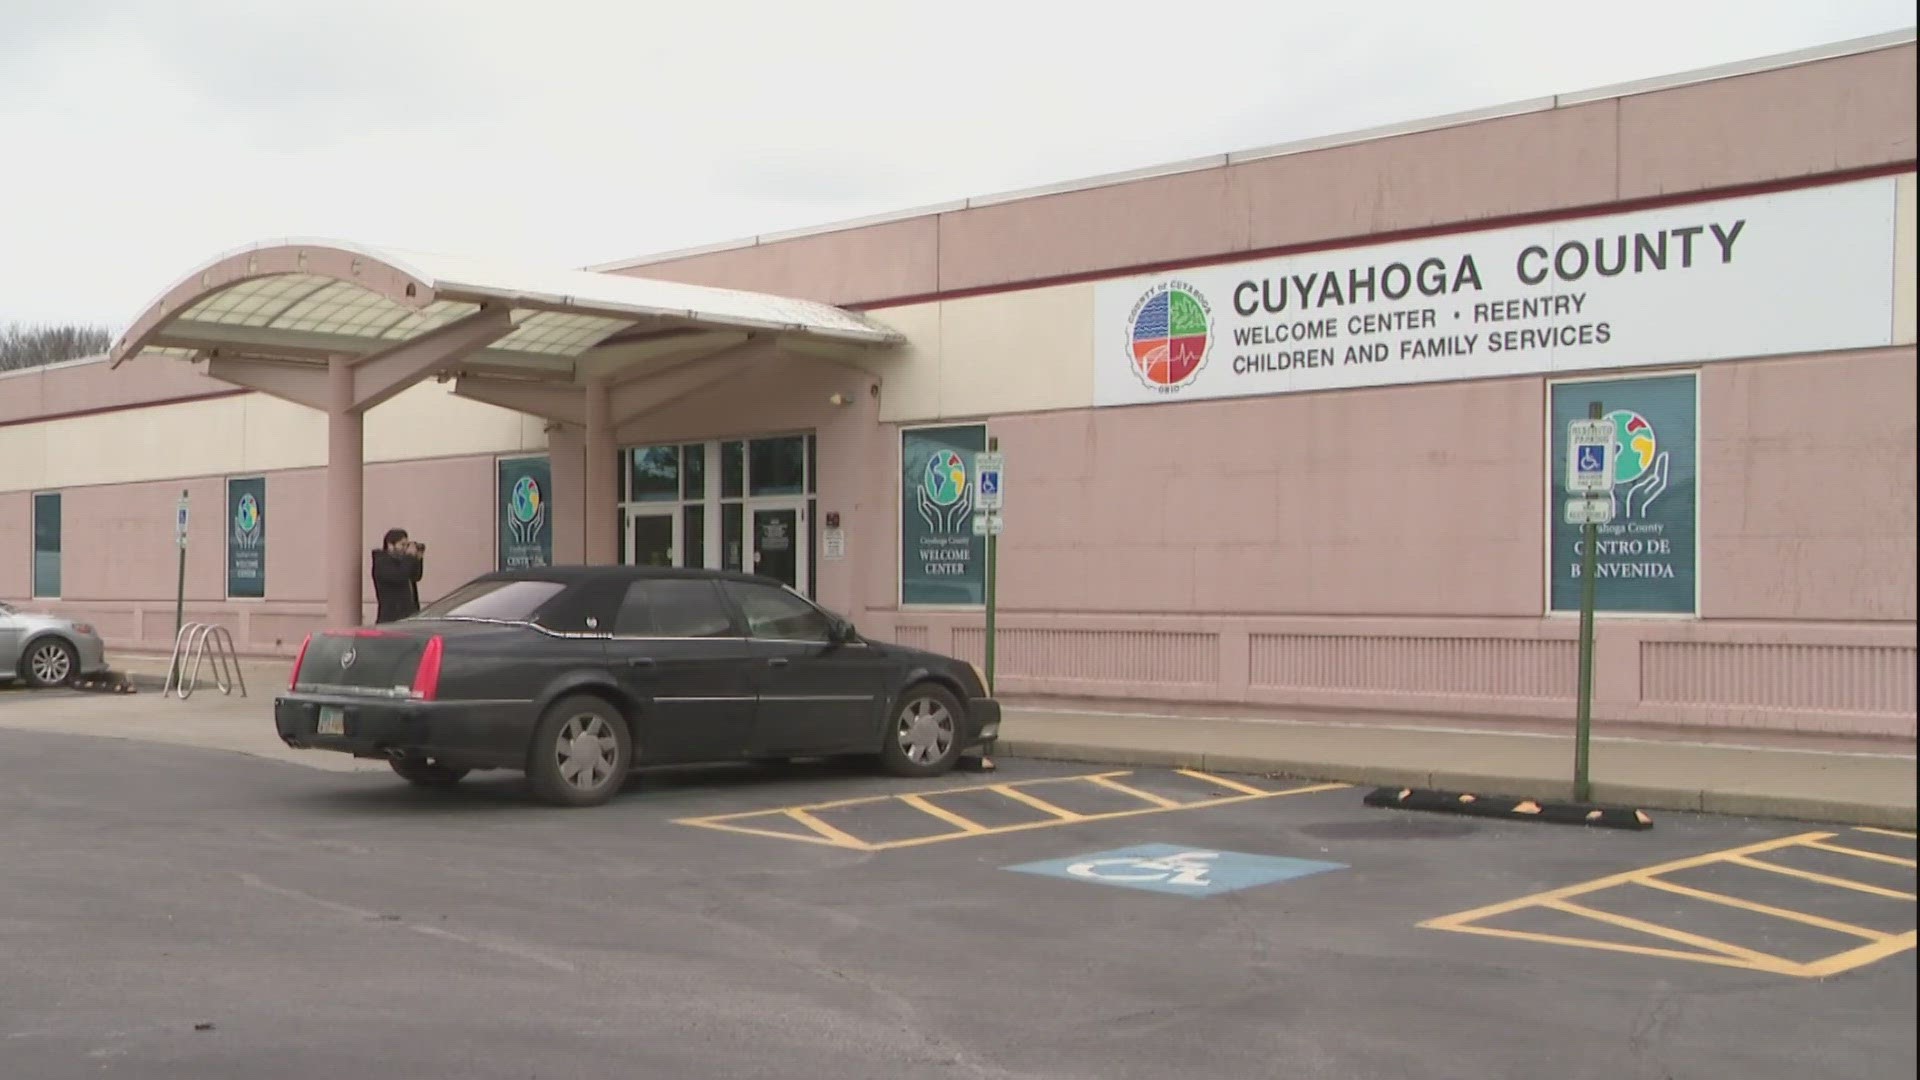 The center will help connect newcomers to Cuyahoga County with resources.